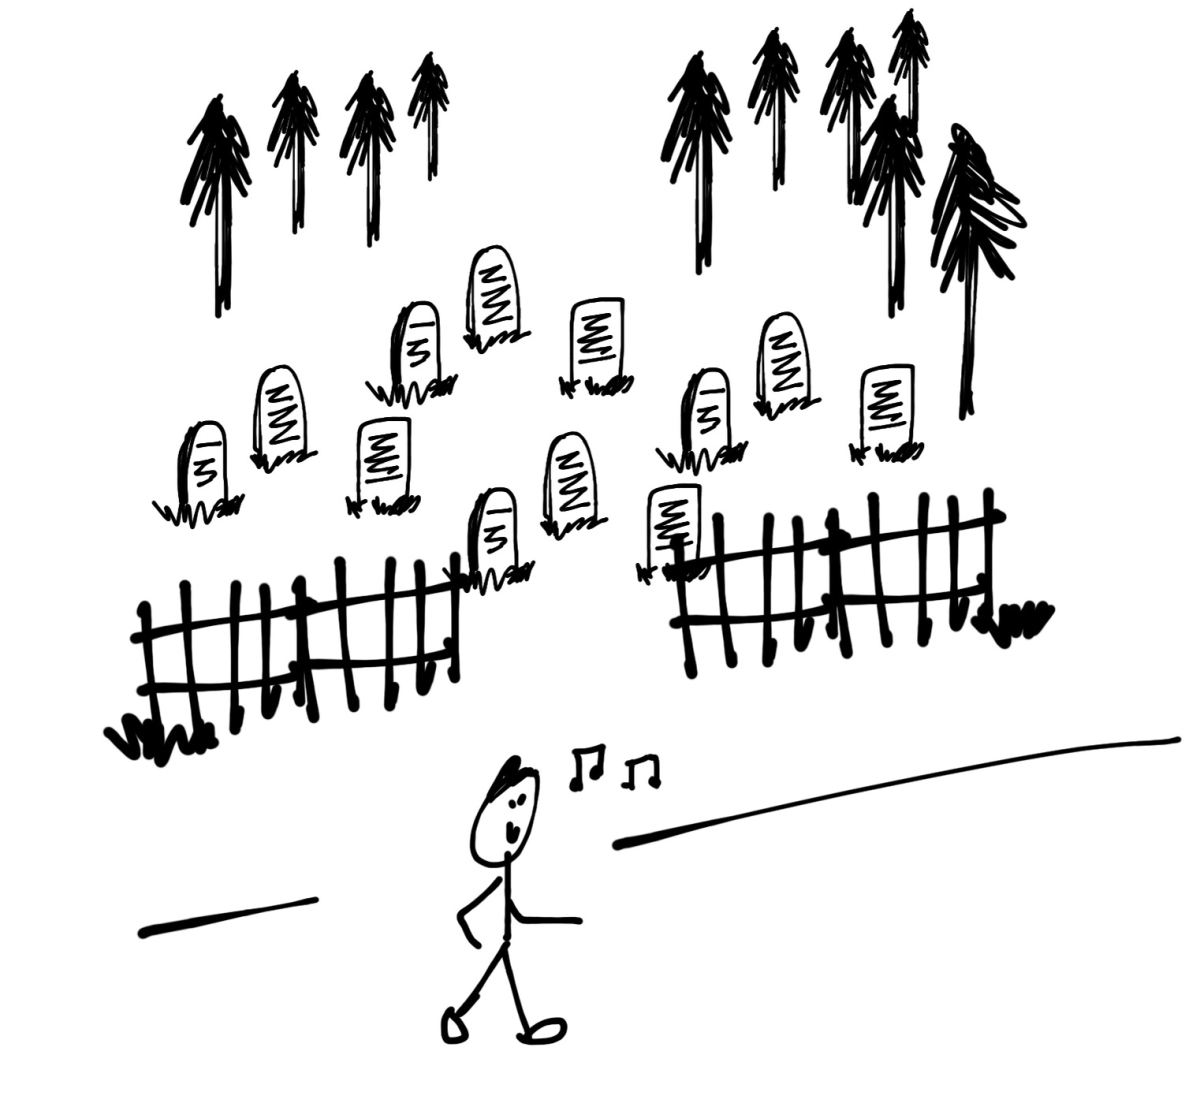 Whistling Past the Cemetery - "To enter a situation with little or no understanding of the possible consequences."